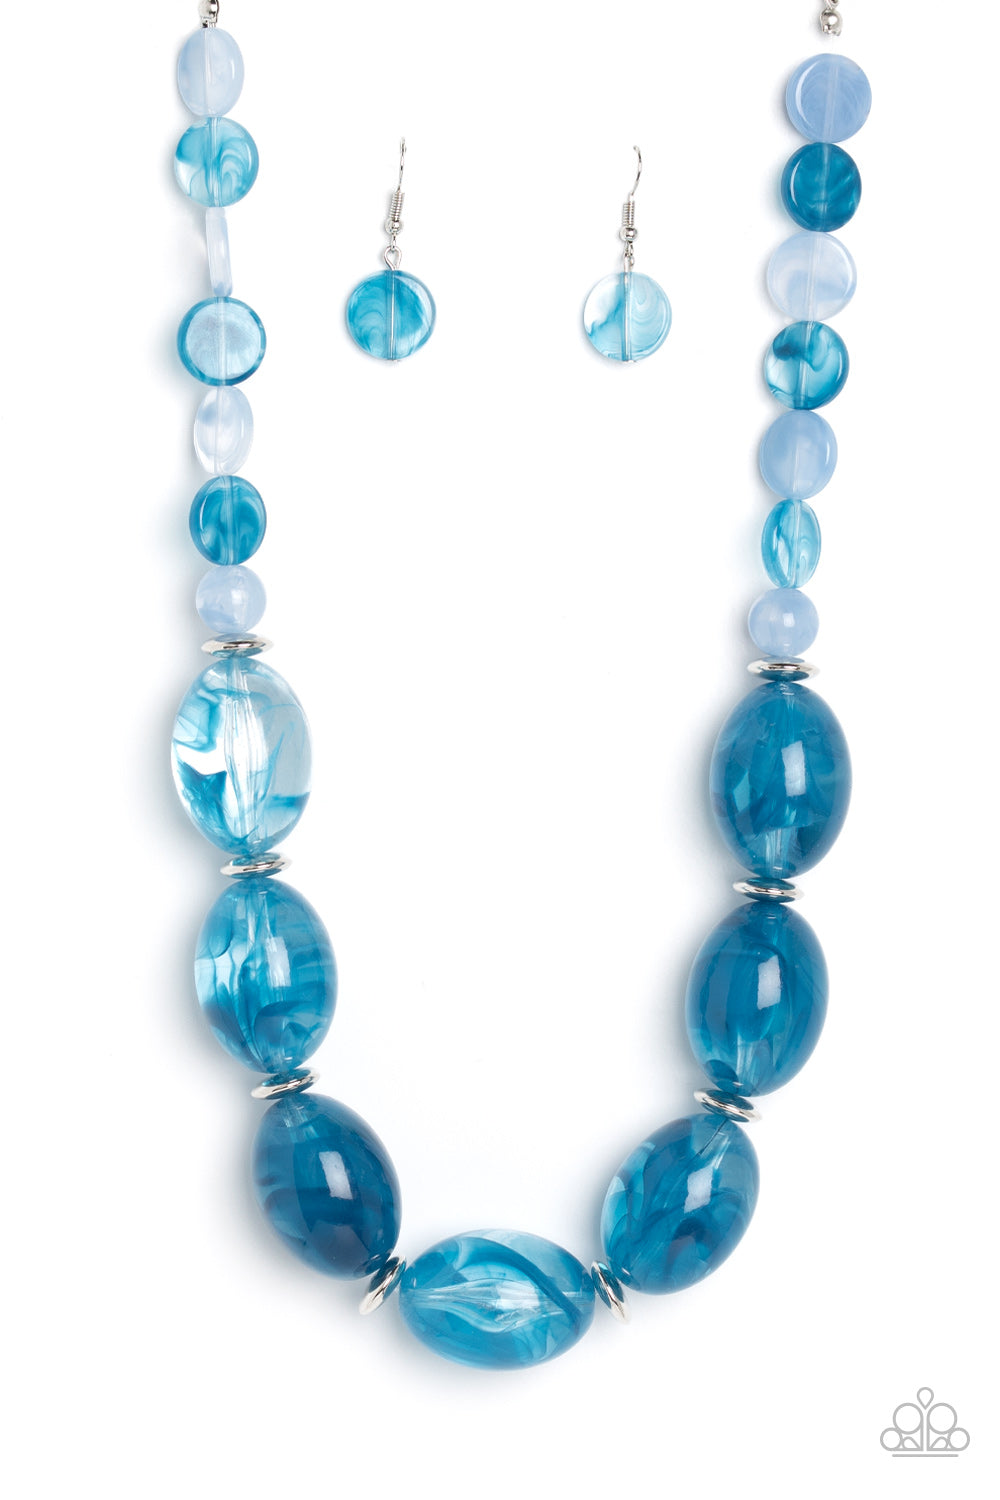 Paparazzi Necklaces - Belle of the Beach - Blue